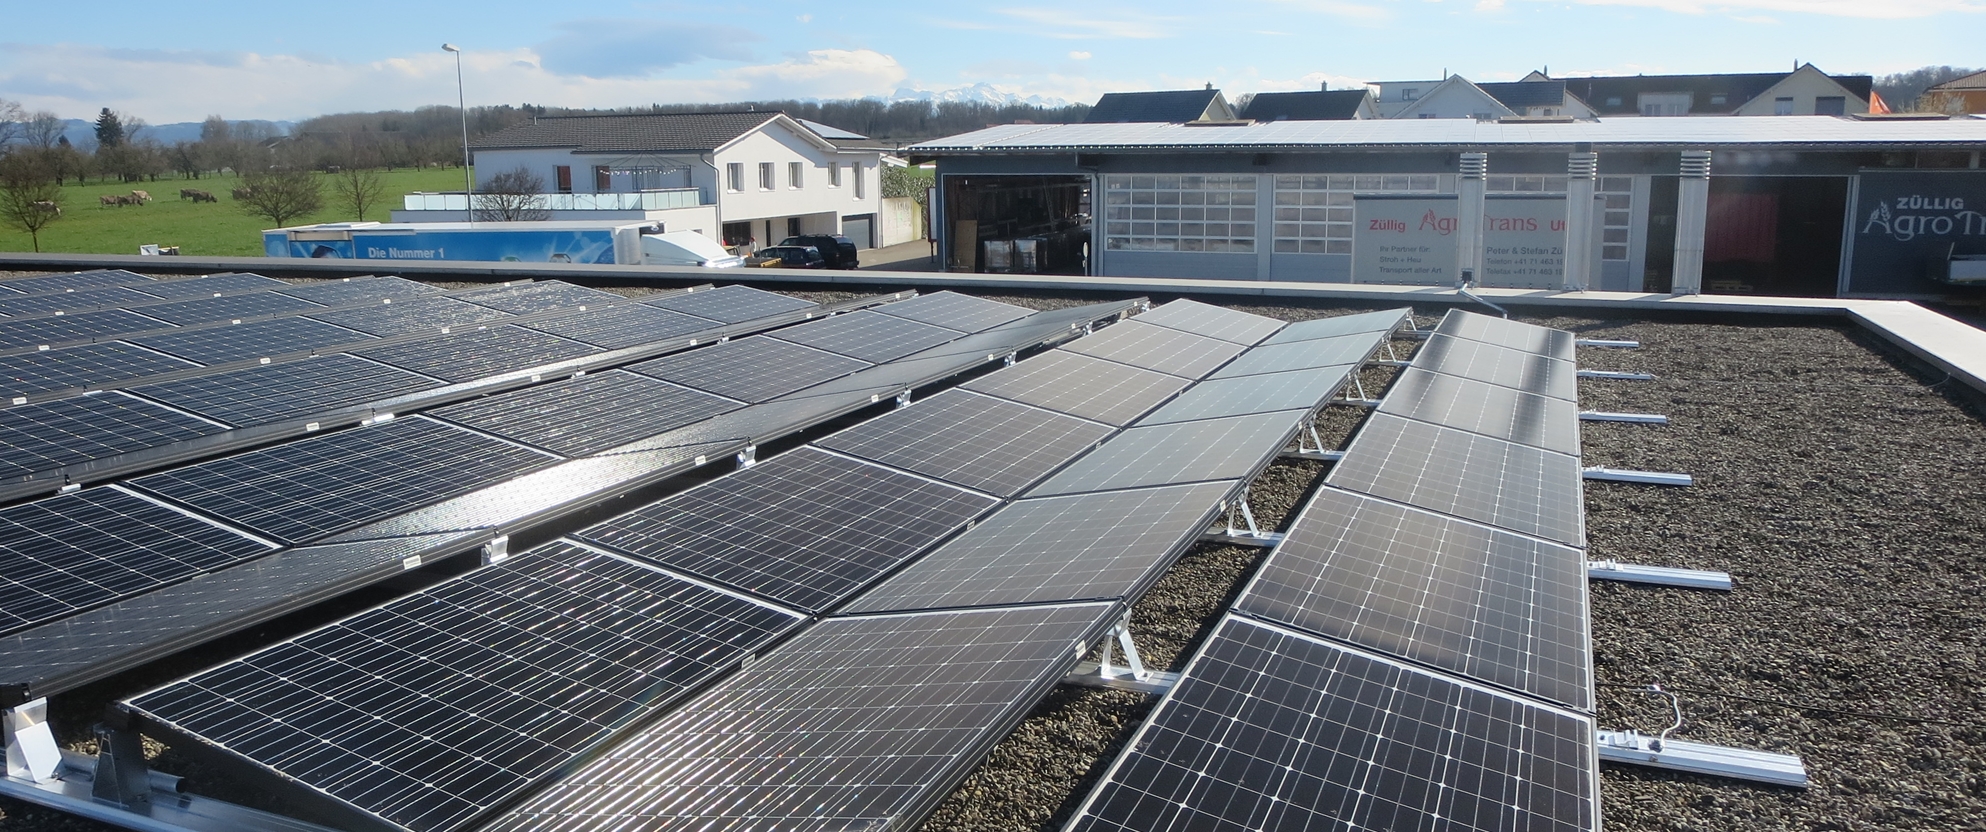 A new photovoltaic installation at VitaPlant